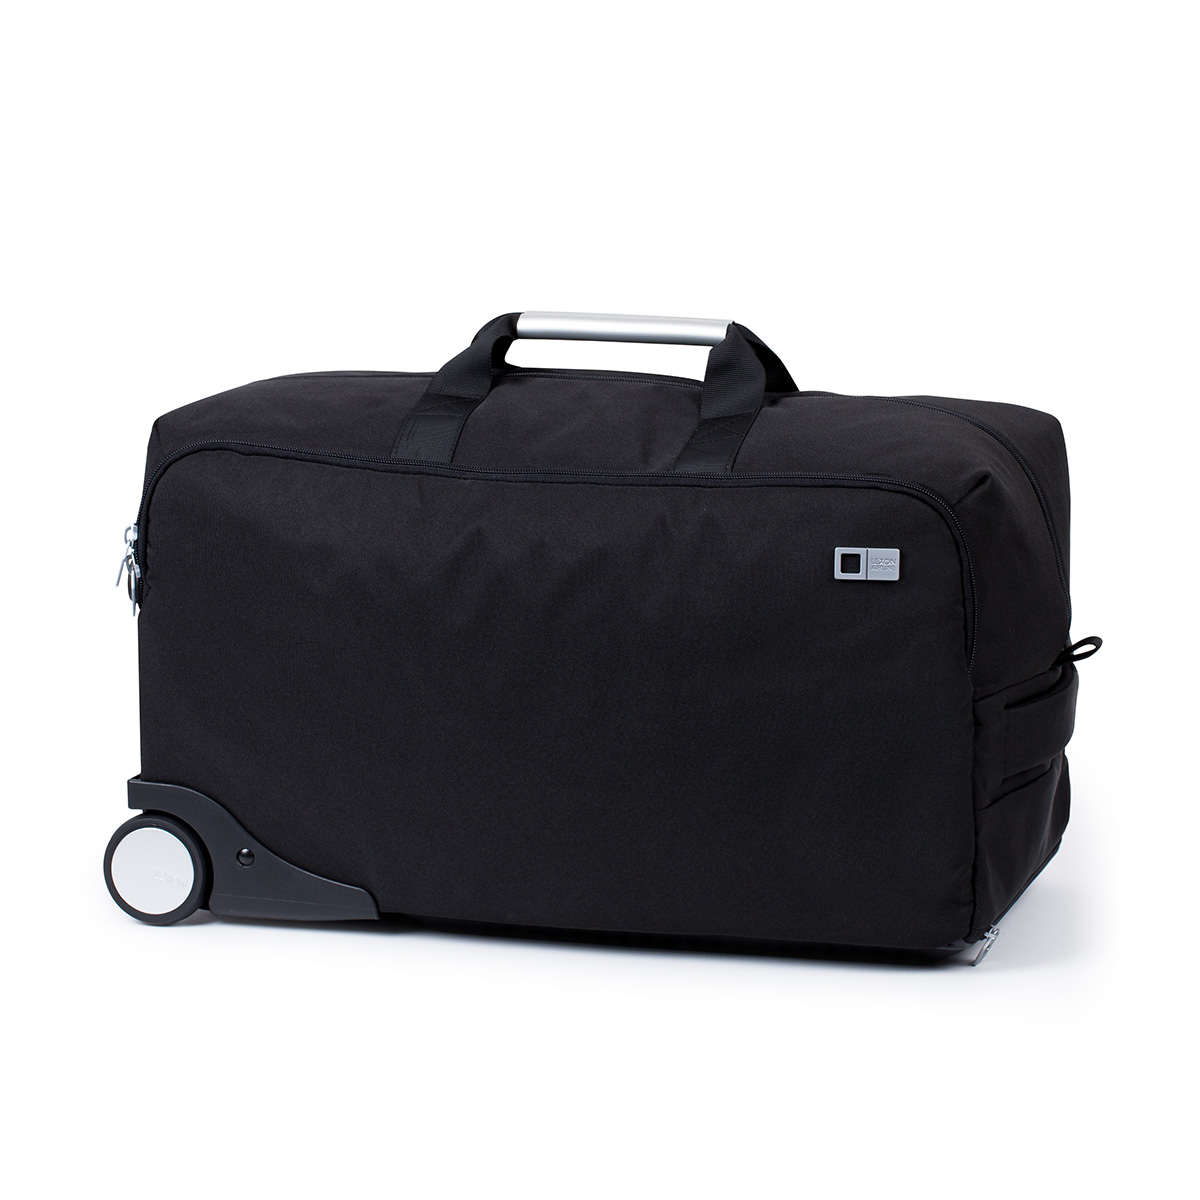 Airline Duffle on Wheels LN2107